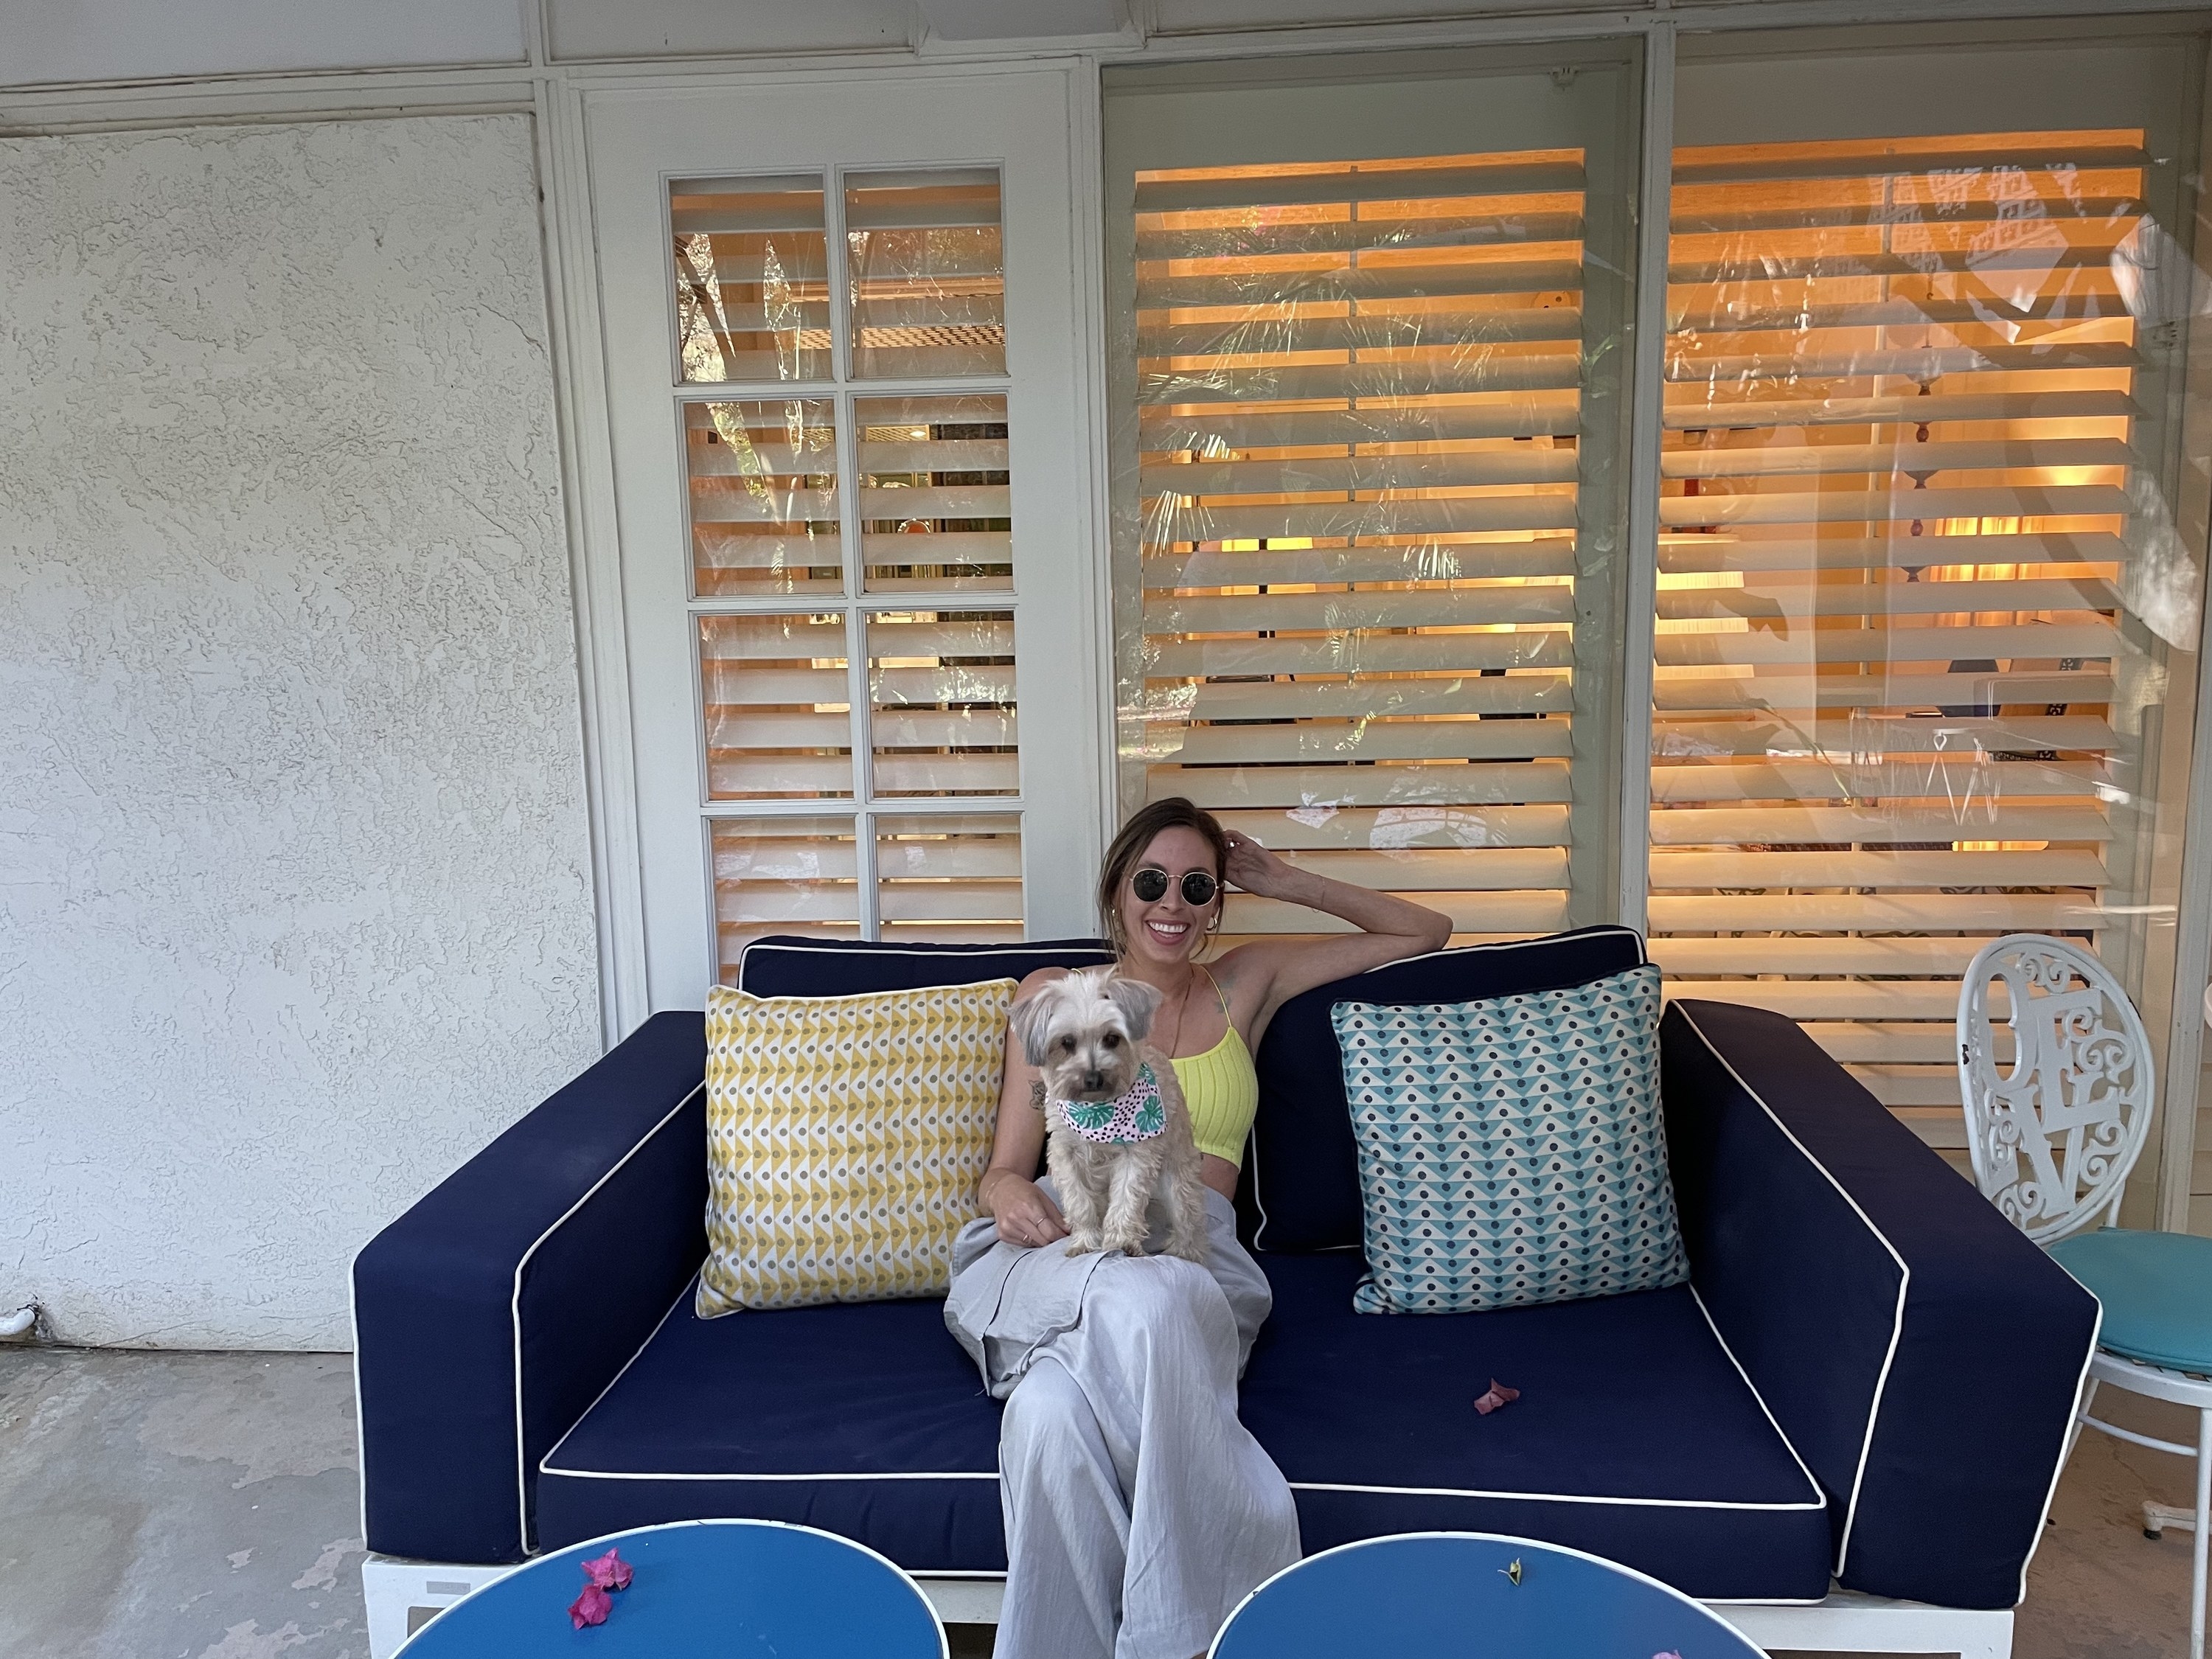 The author sitting on the patio with her dog, Pepper, on her lap